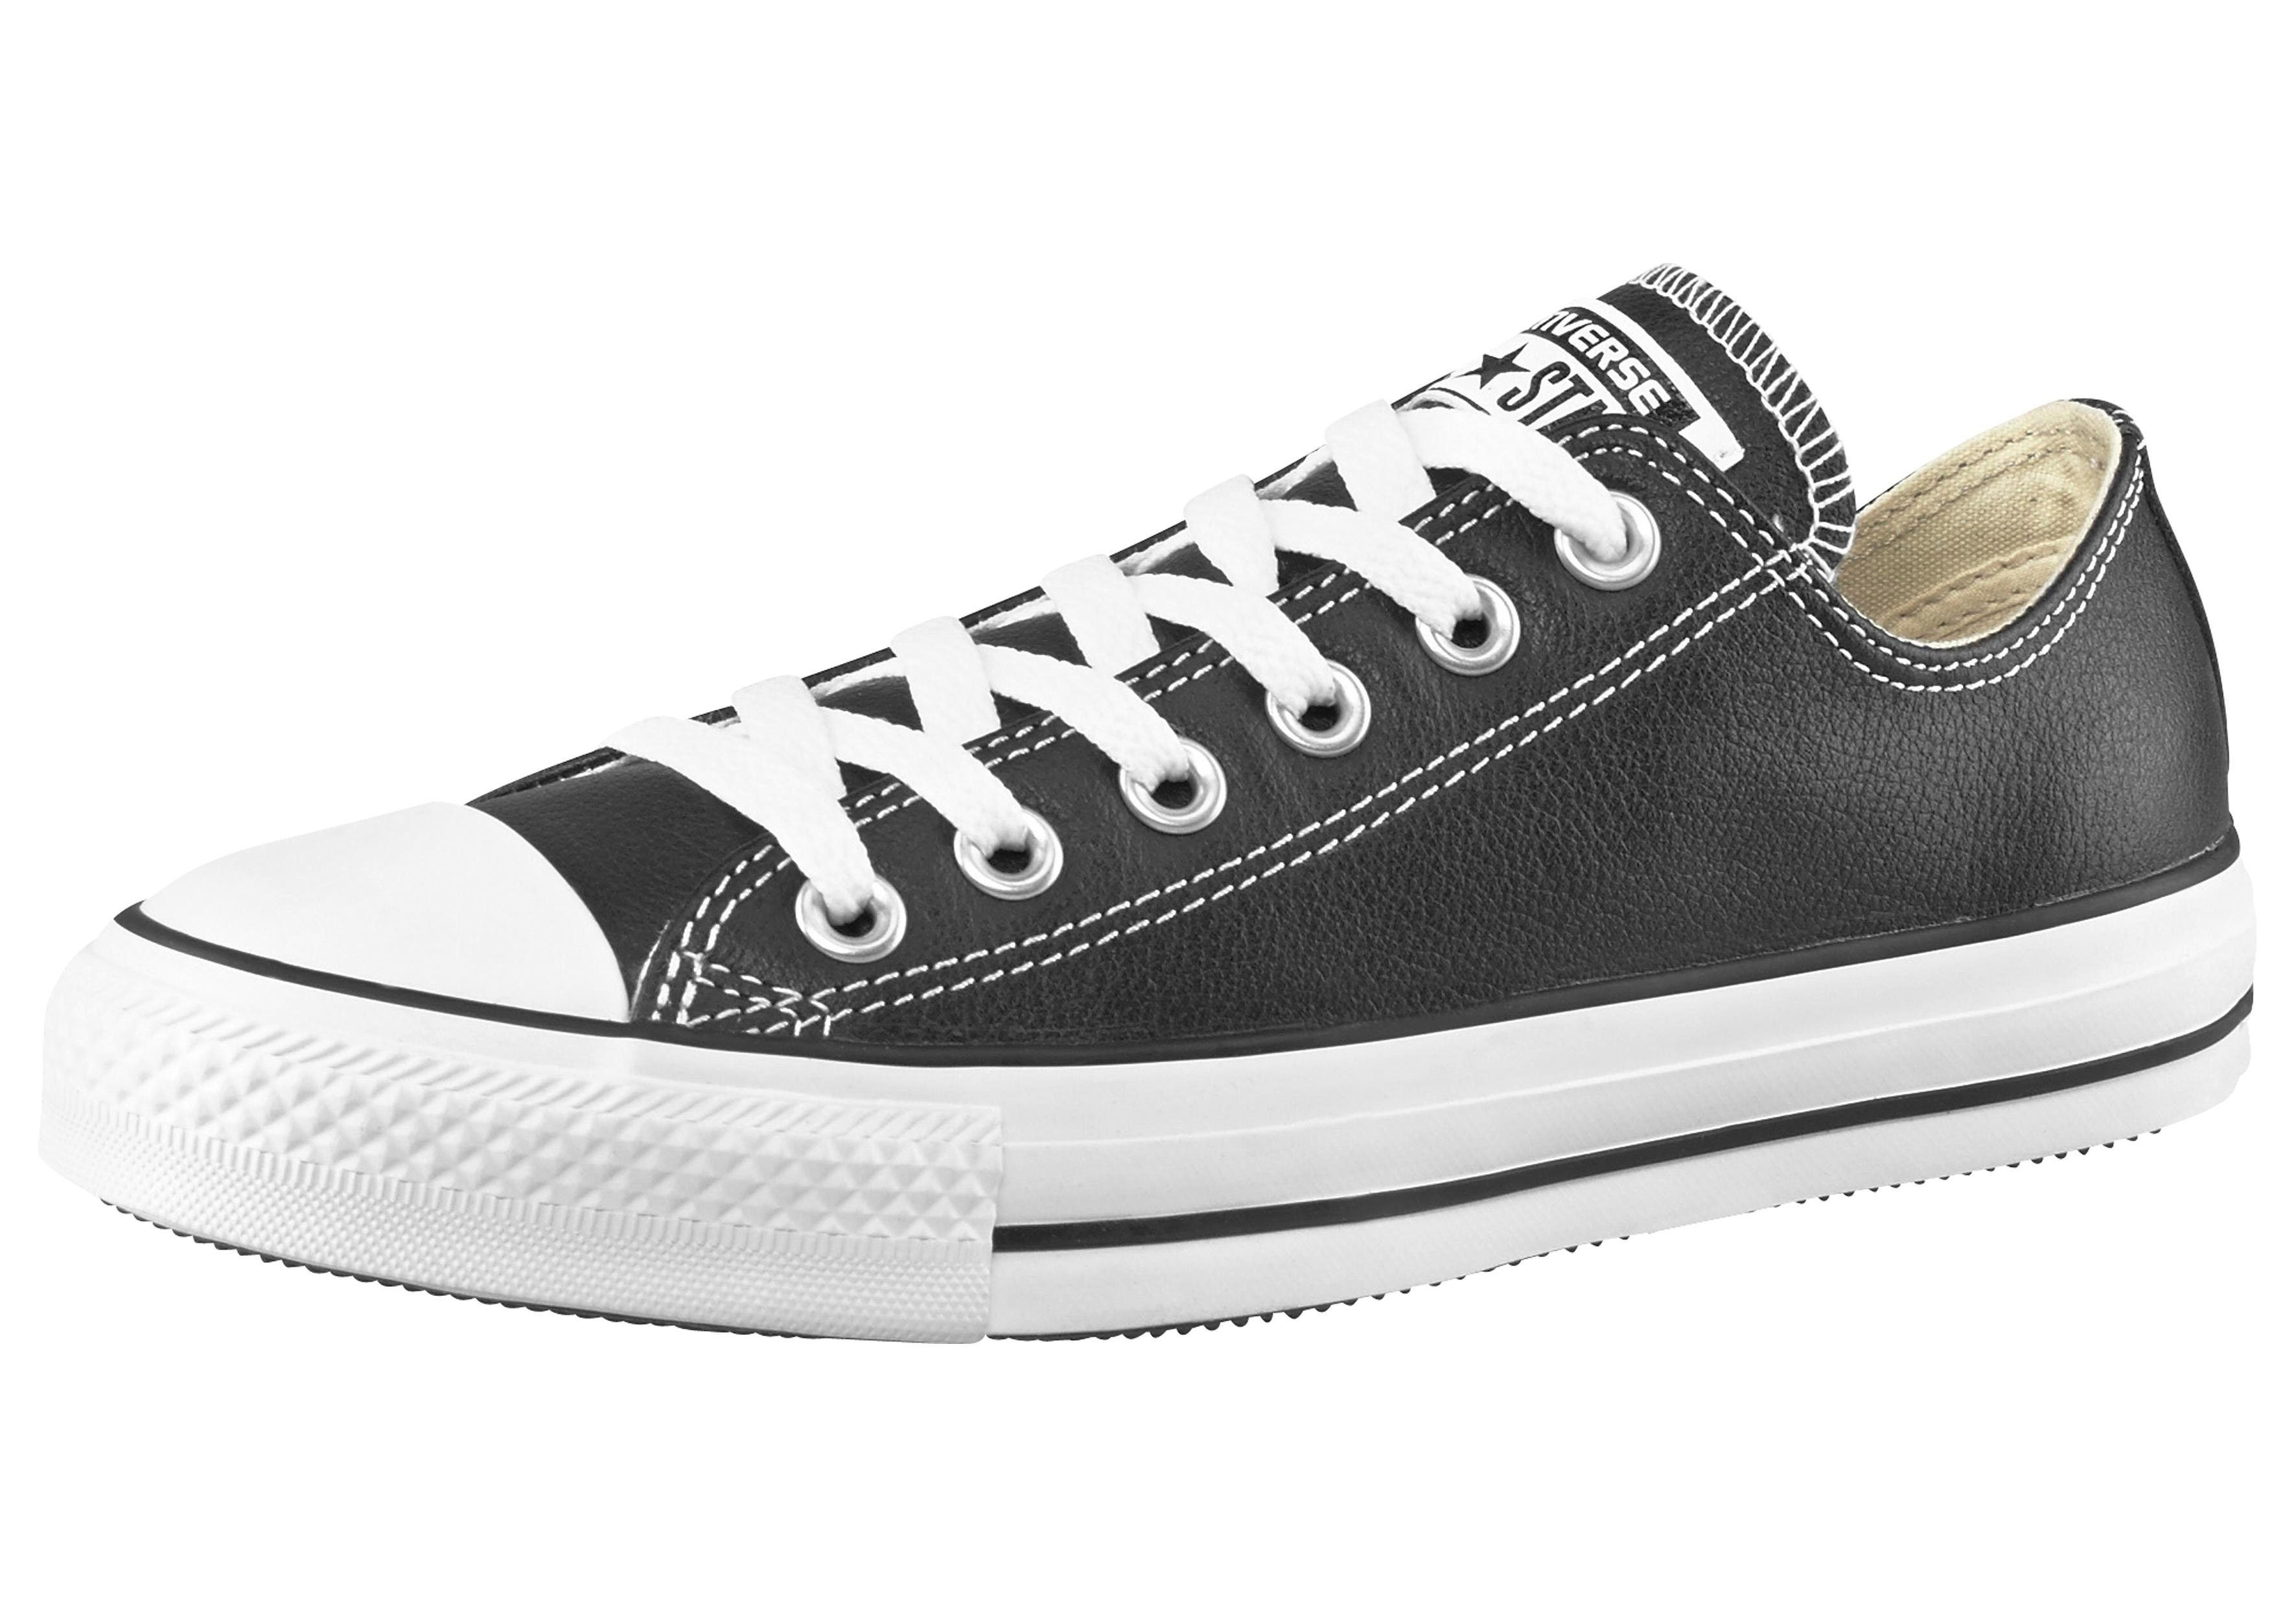 Converse Chuck Taylor All Star Basic Leather Ox Sneaker Black